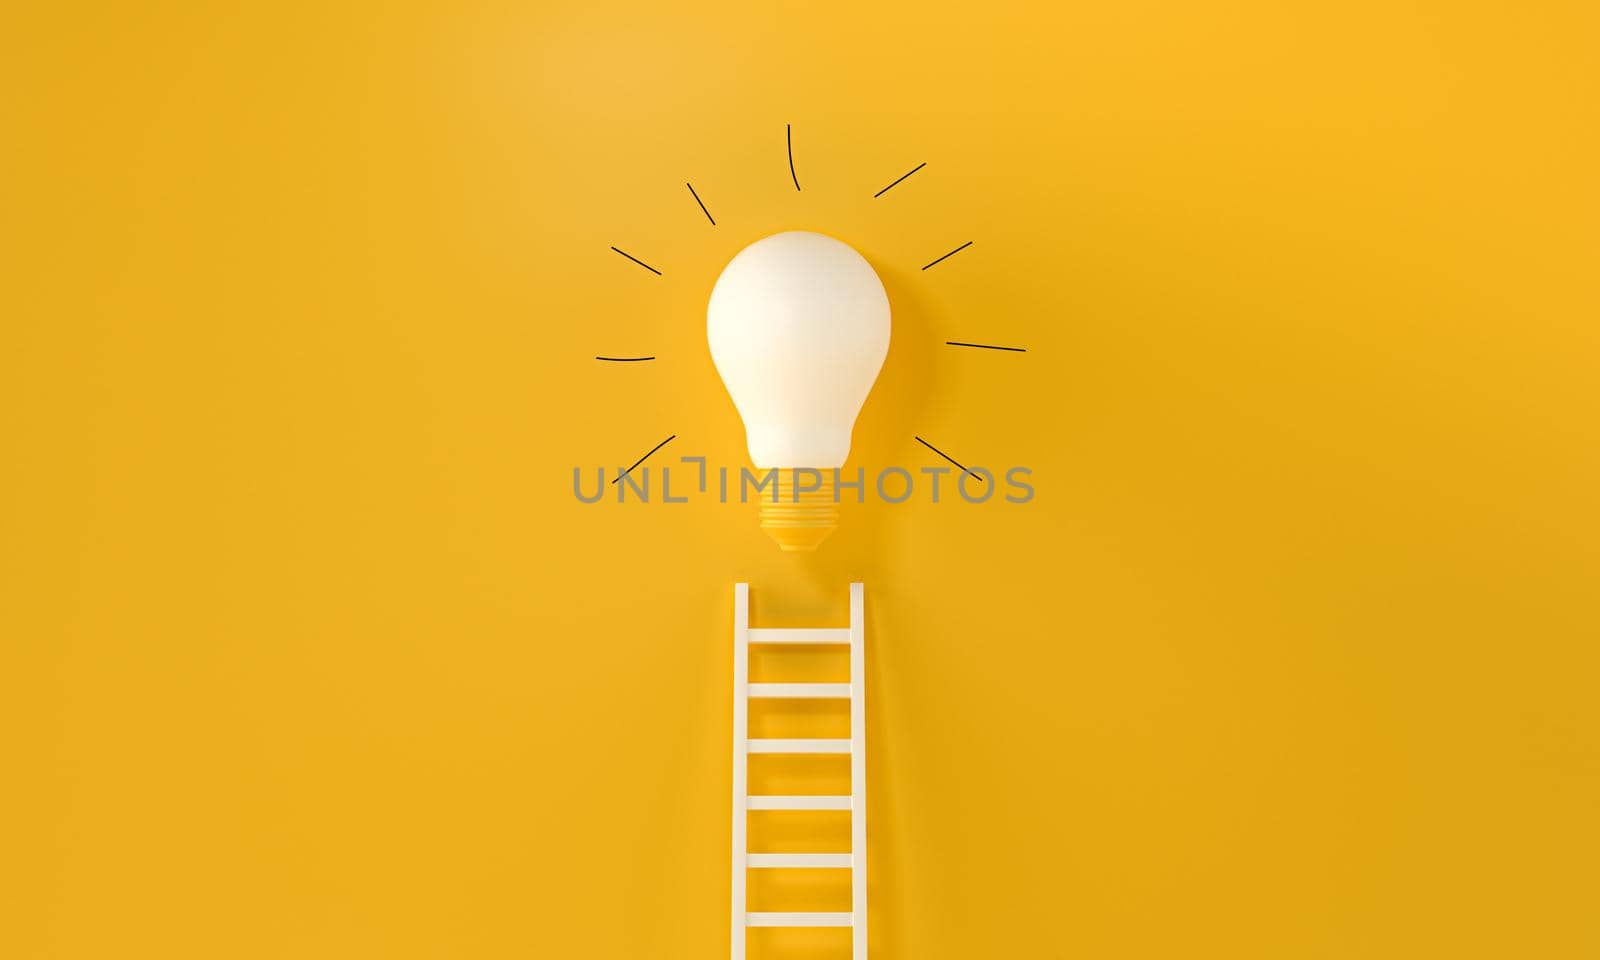 Lightbulb With A Ladder and handmade gloss lines on yellow background. Representing An Idea, Creativity and innovation concept with copy space text. 3d rendering.